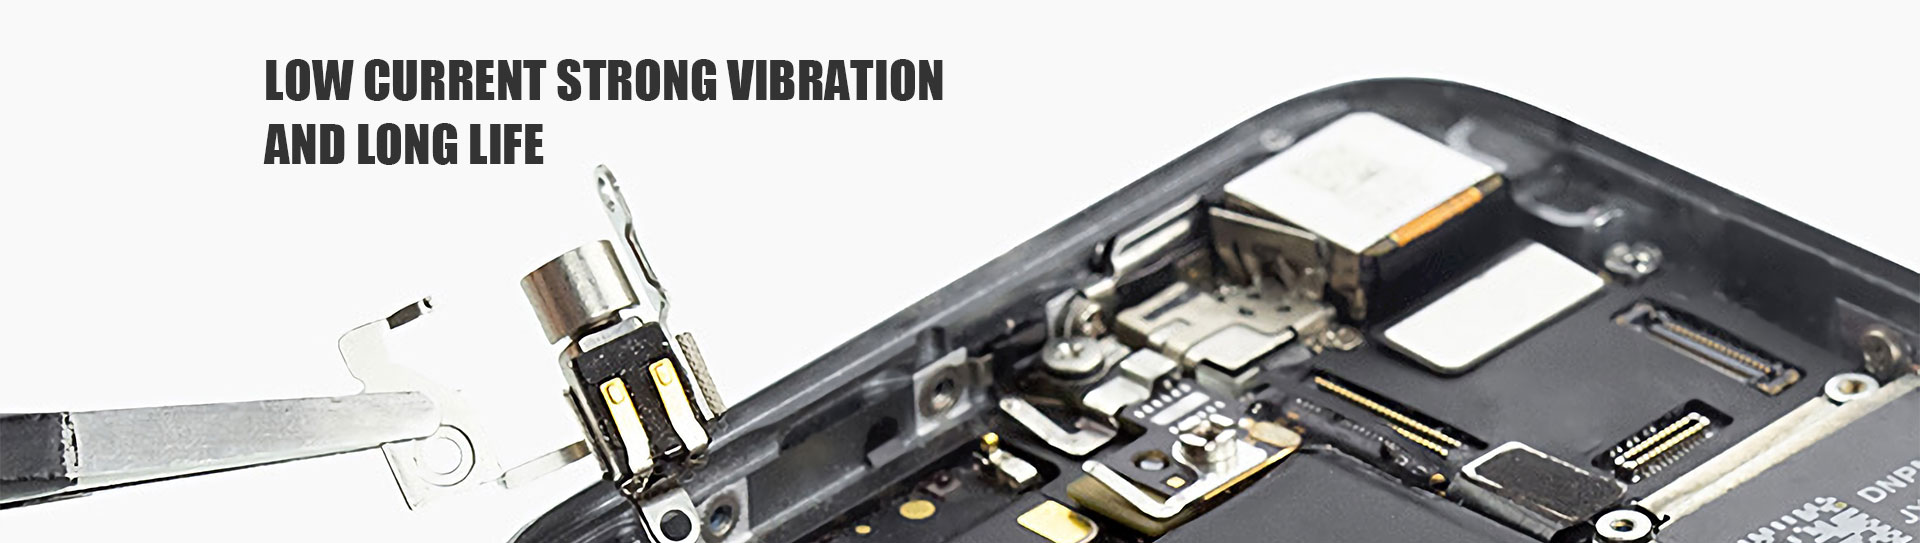 Low Current Strong Vibration and Long Life